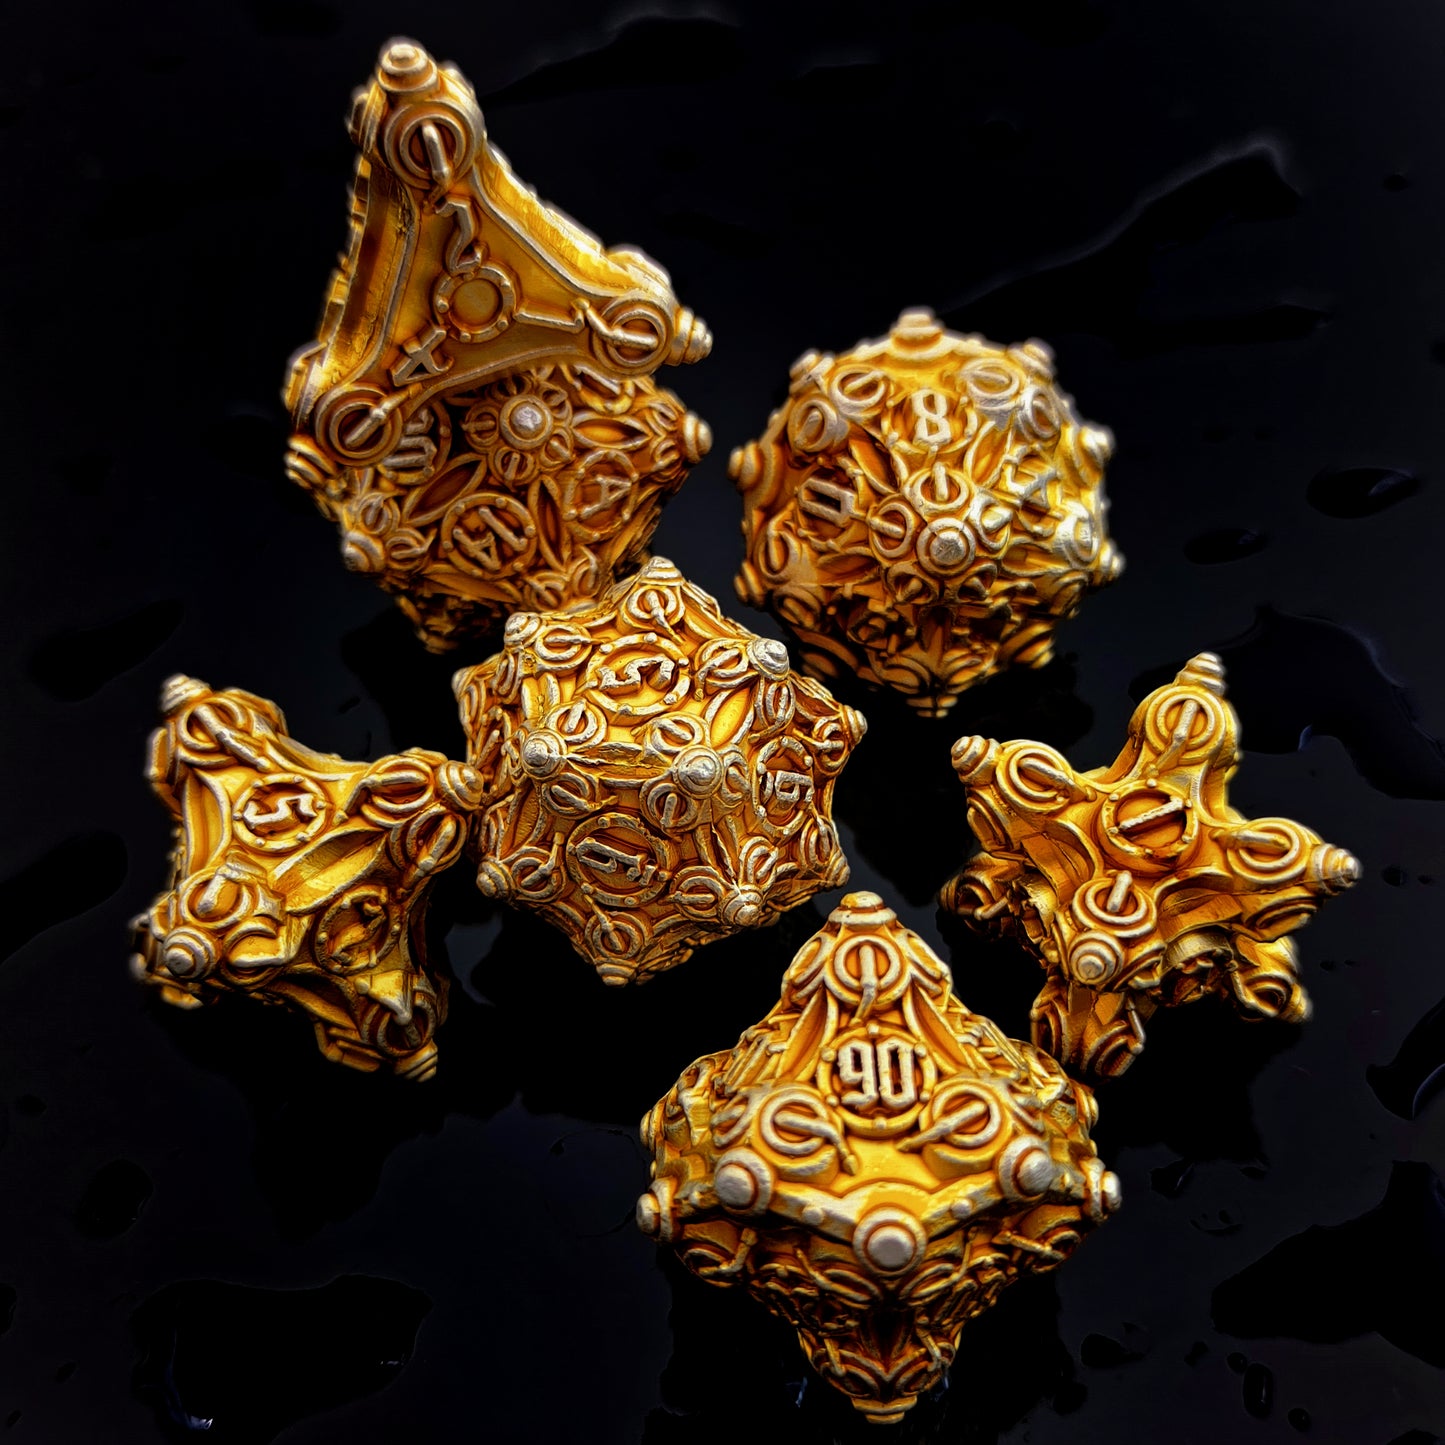 FREE Today: Bumble Bee Yellow Metal Dice